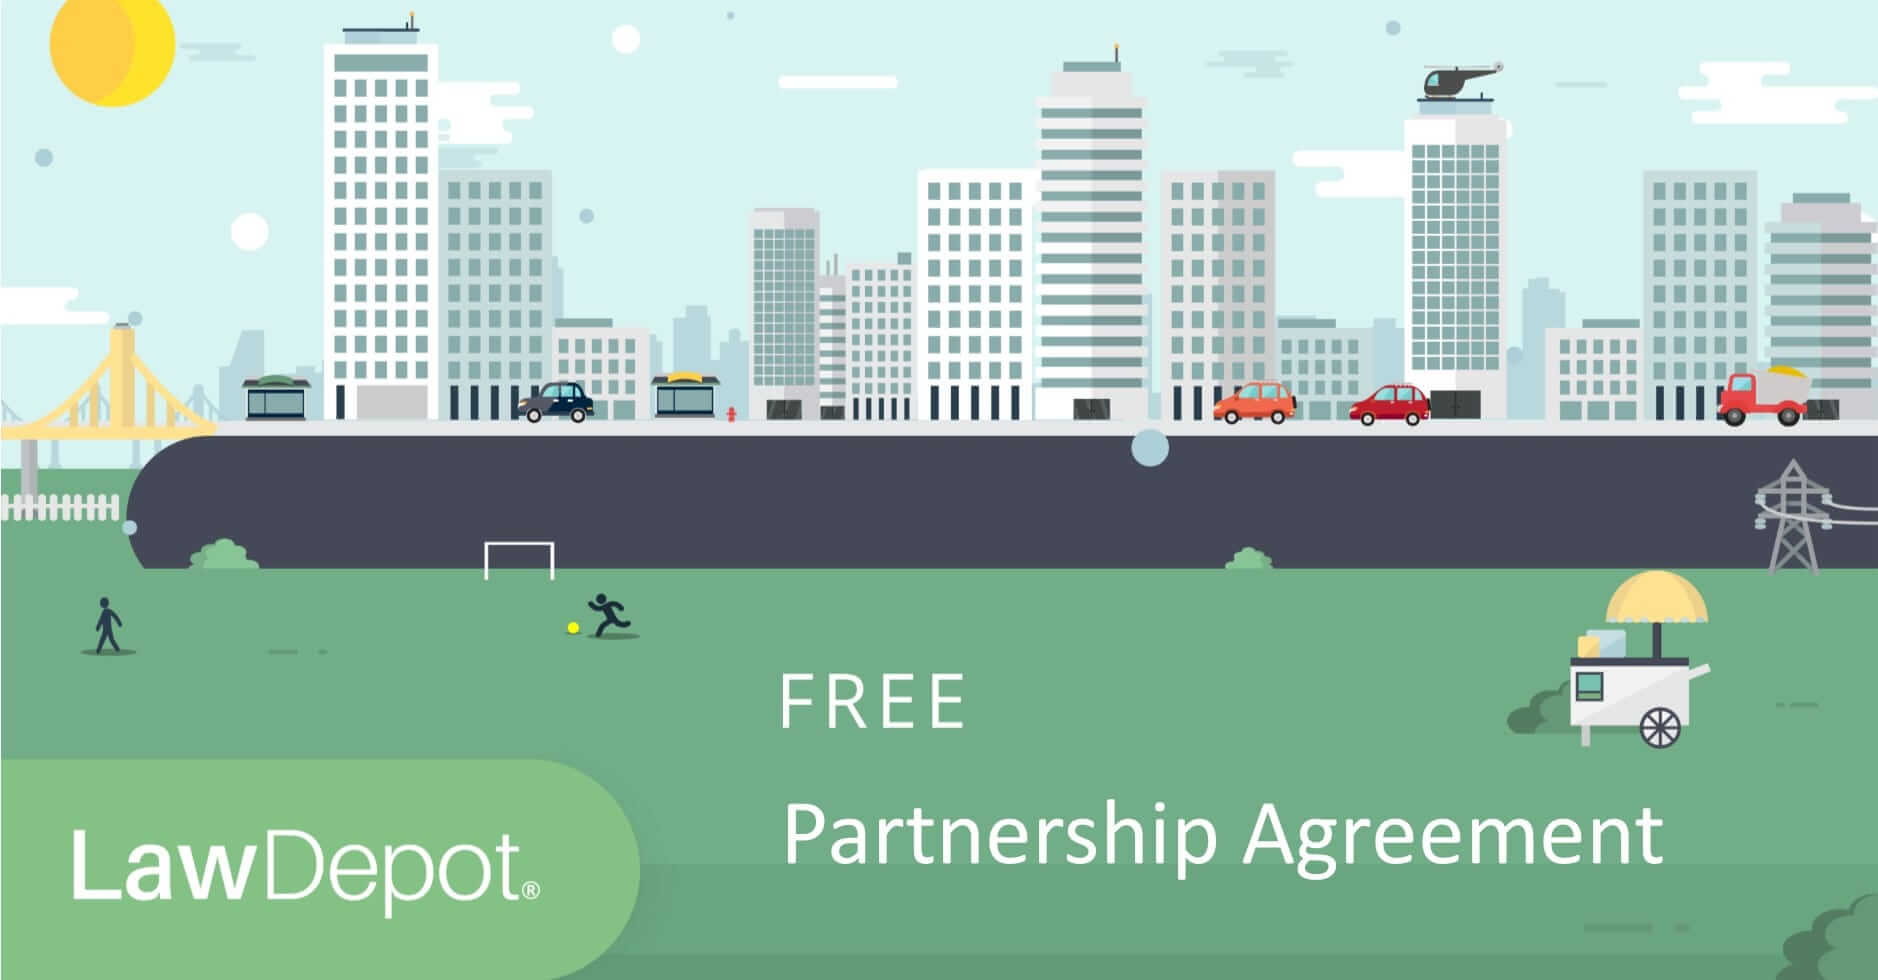 Business Partnership Agreement Between Two Companies Free Partnership Agreement Create Download And Print Lawdepot Us